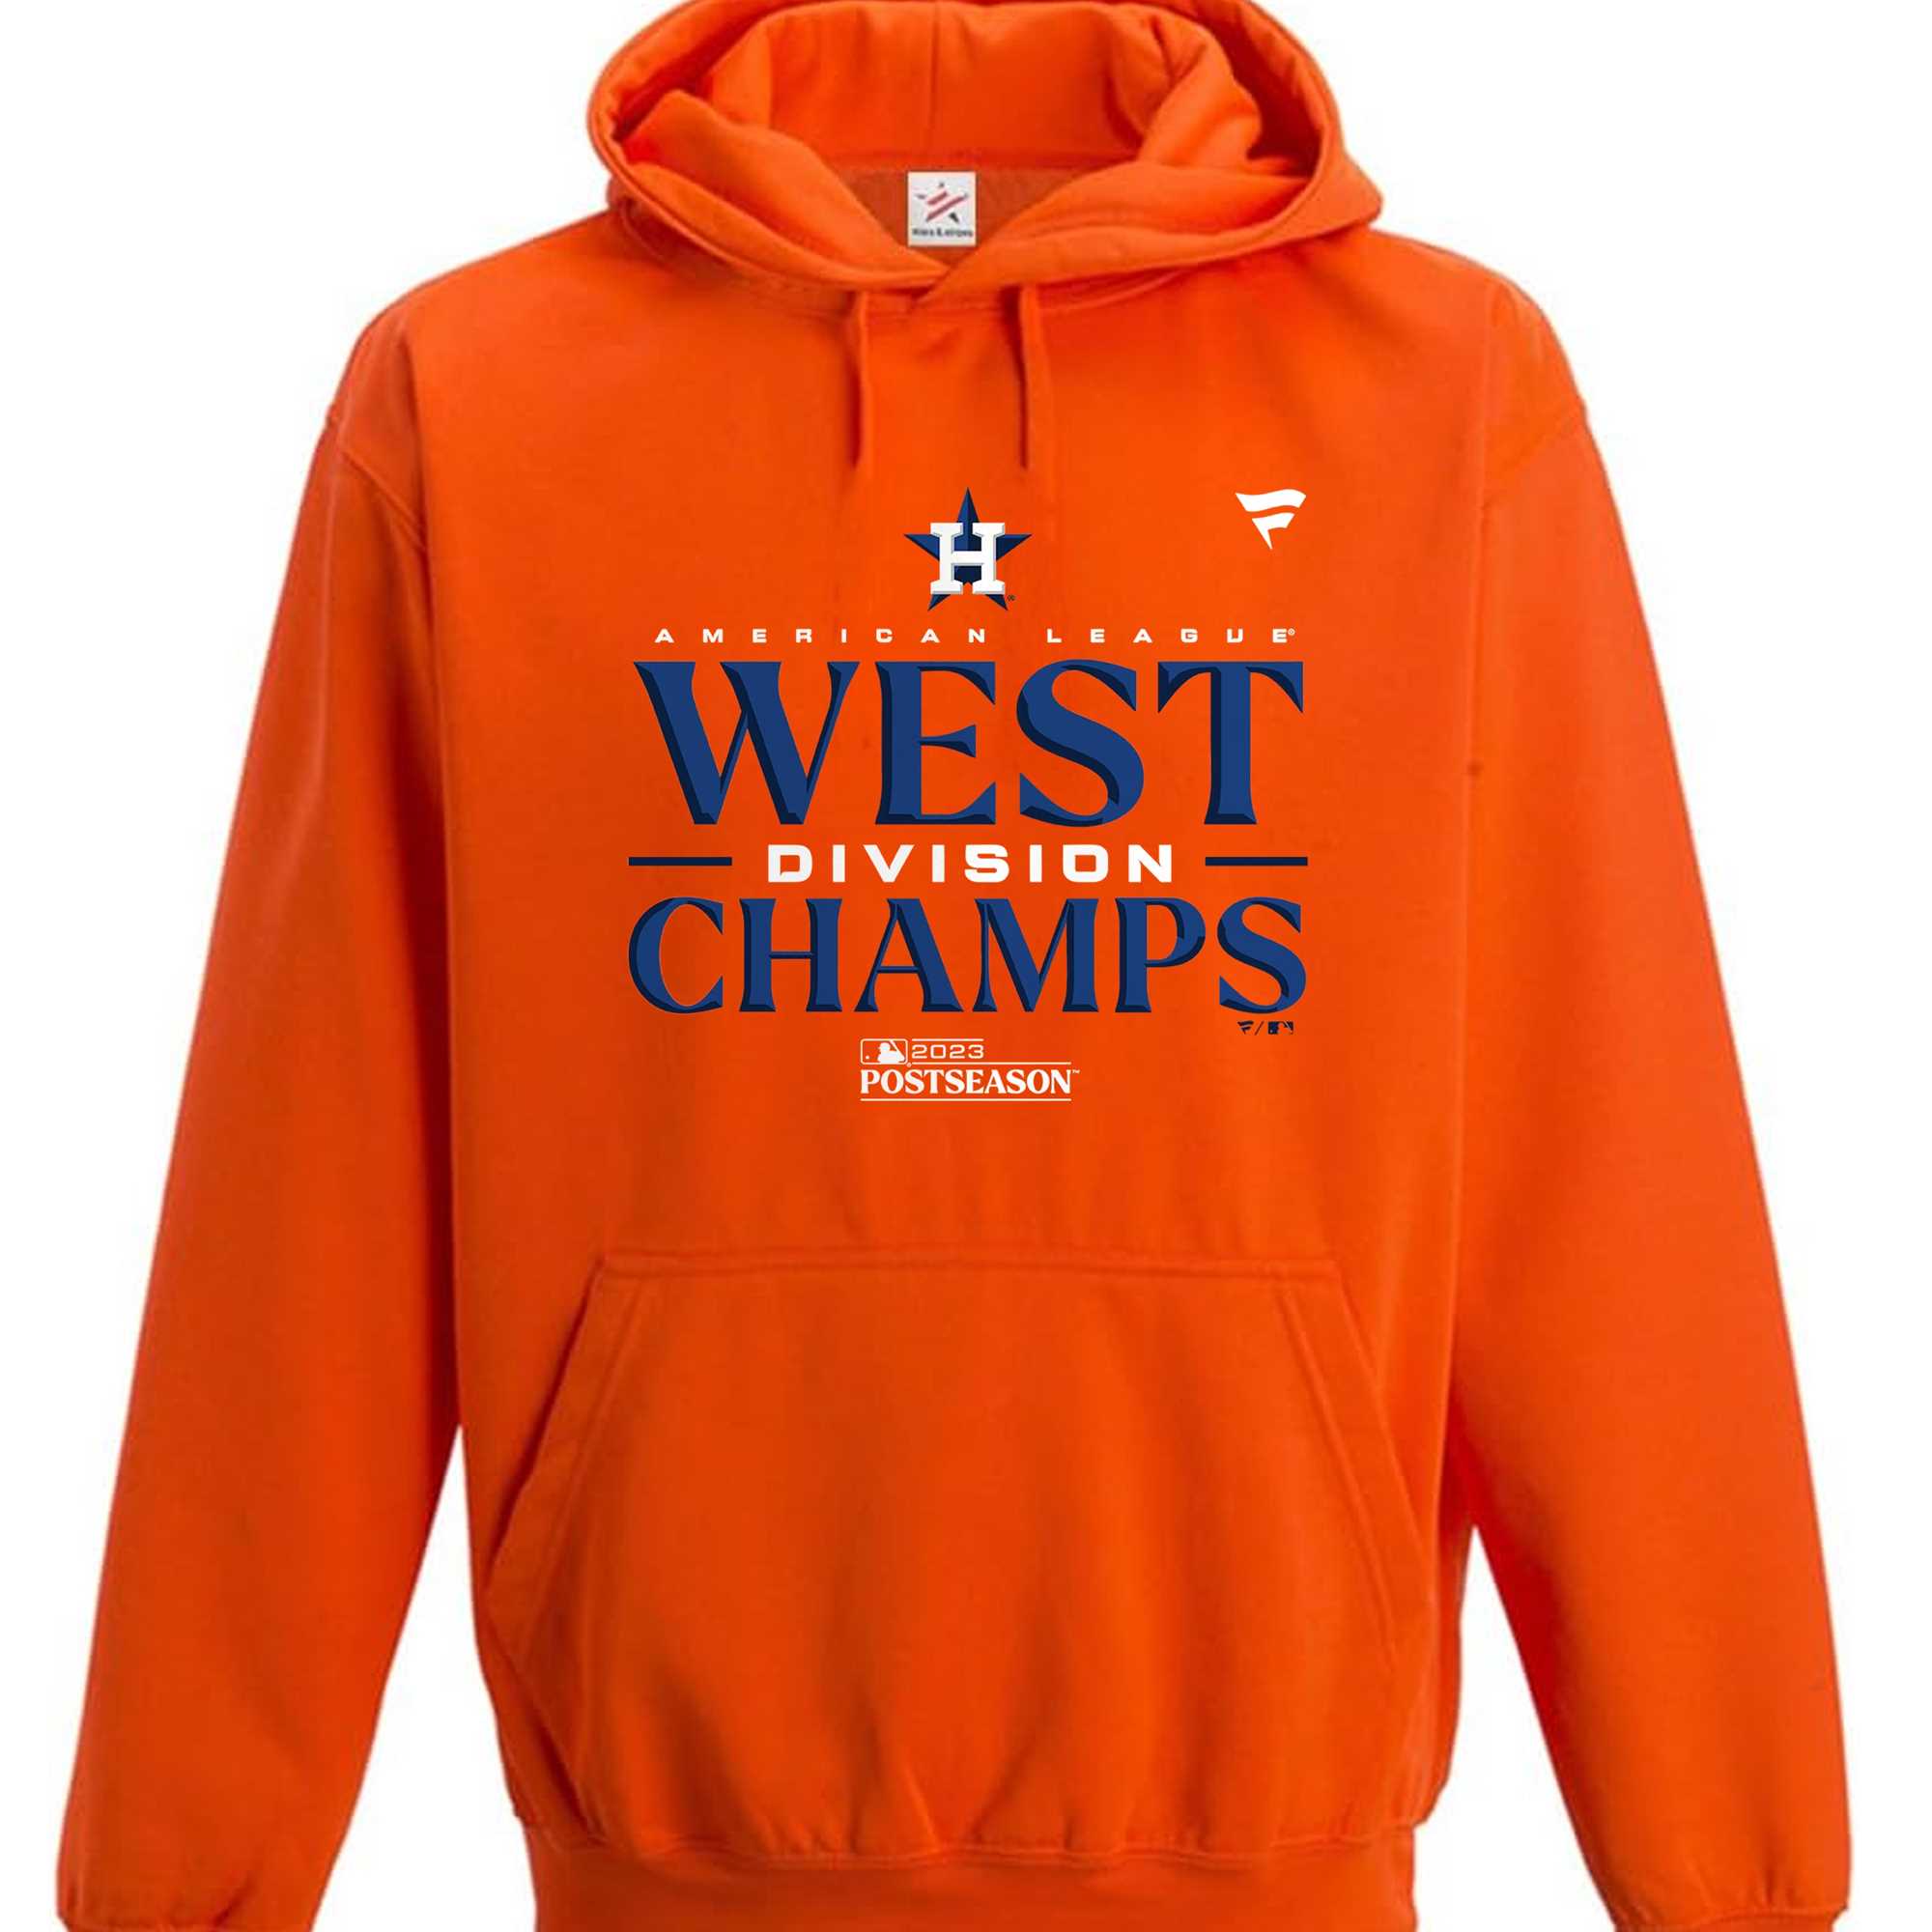 Official 2023 Houston Astros AL West Division Champions Shirt, hoodie,  sweater, long sleeve and tank top